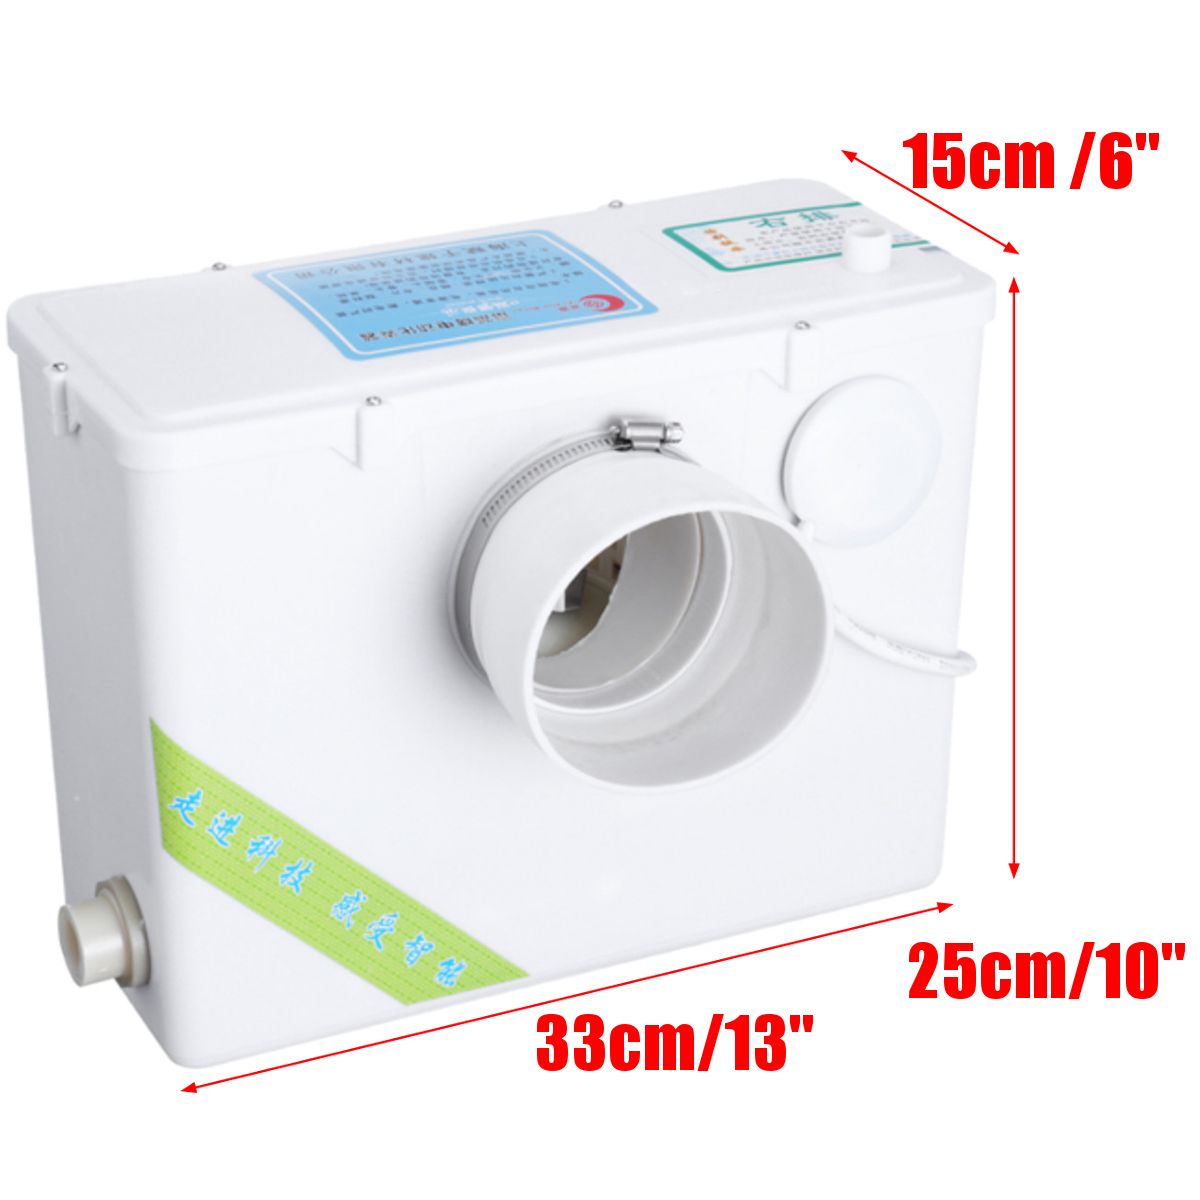 220V-Lower-Right-Outlet-Waste-Water-Pump-Auto-Disposal-Crush-Excreta-Toilet-System-1332304